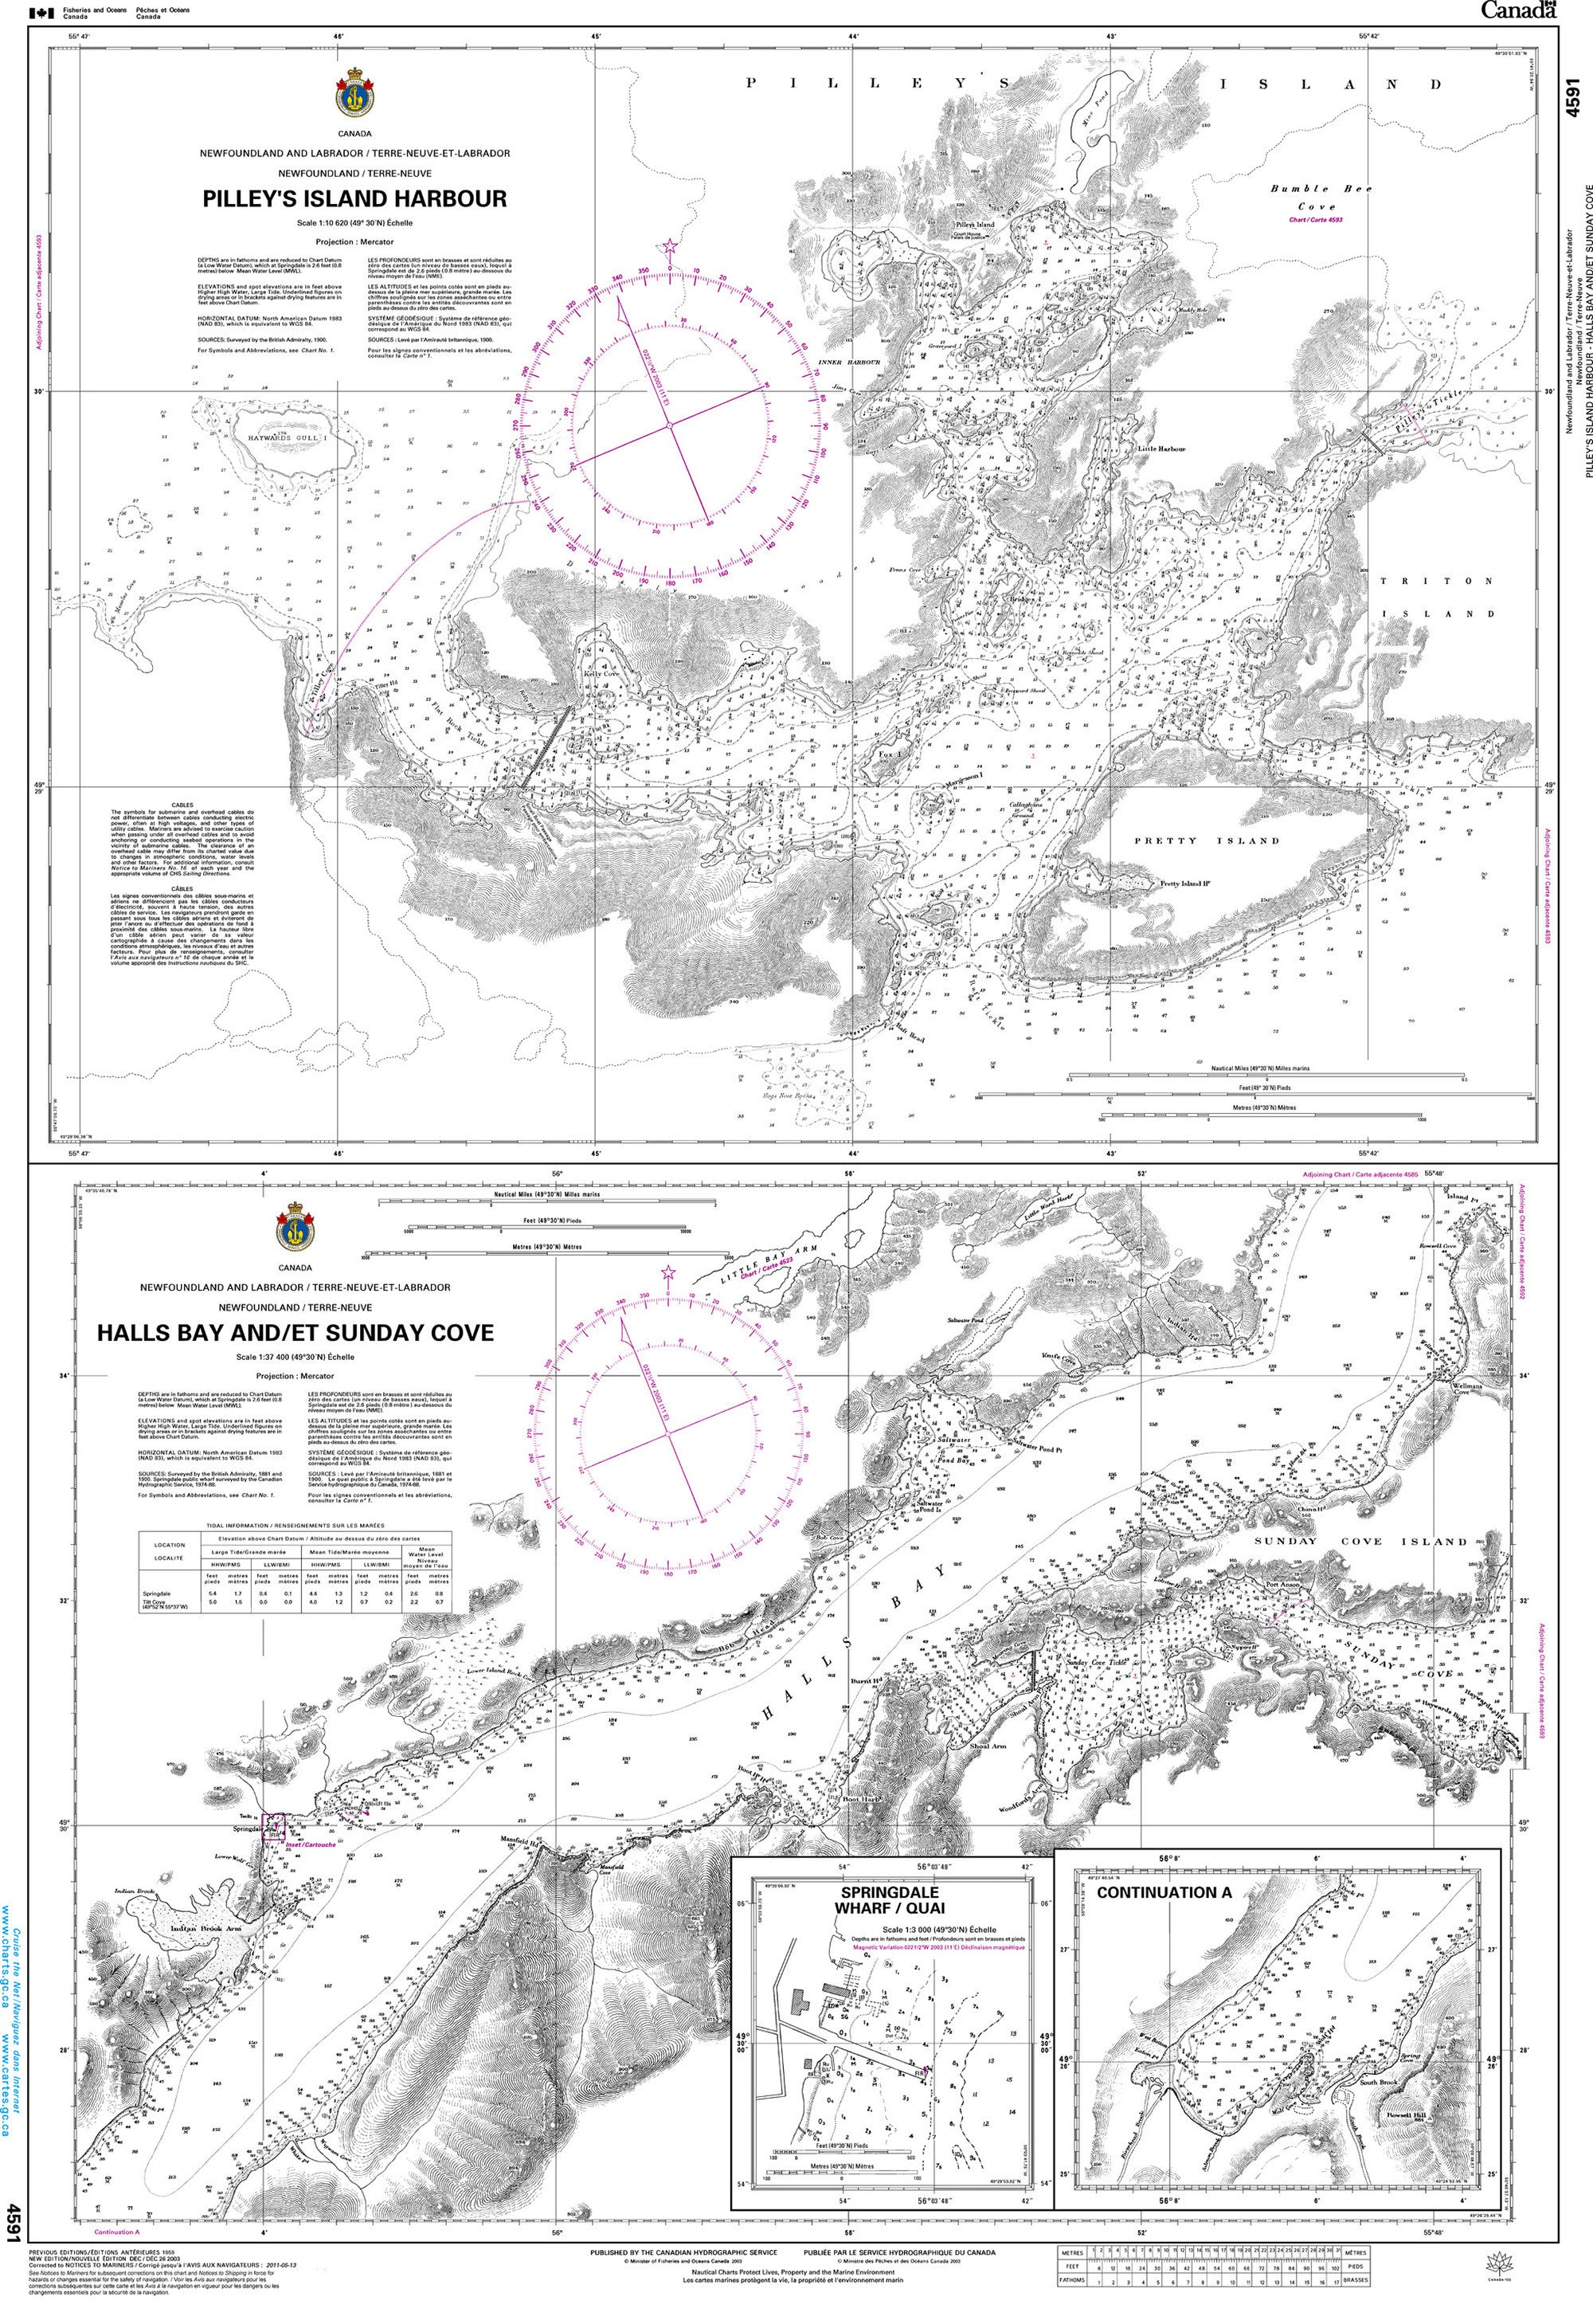 Canadian Hydrographic Service Nautical Chart CHS4591: Pilley's Island Harbour-Halls Bay and/et Sunday Cove